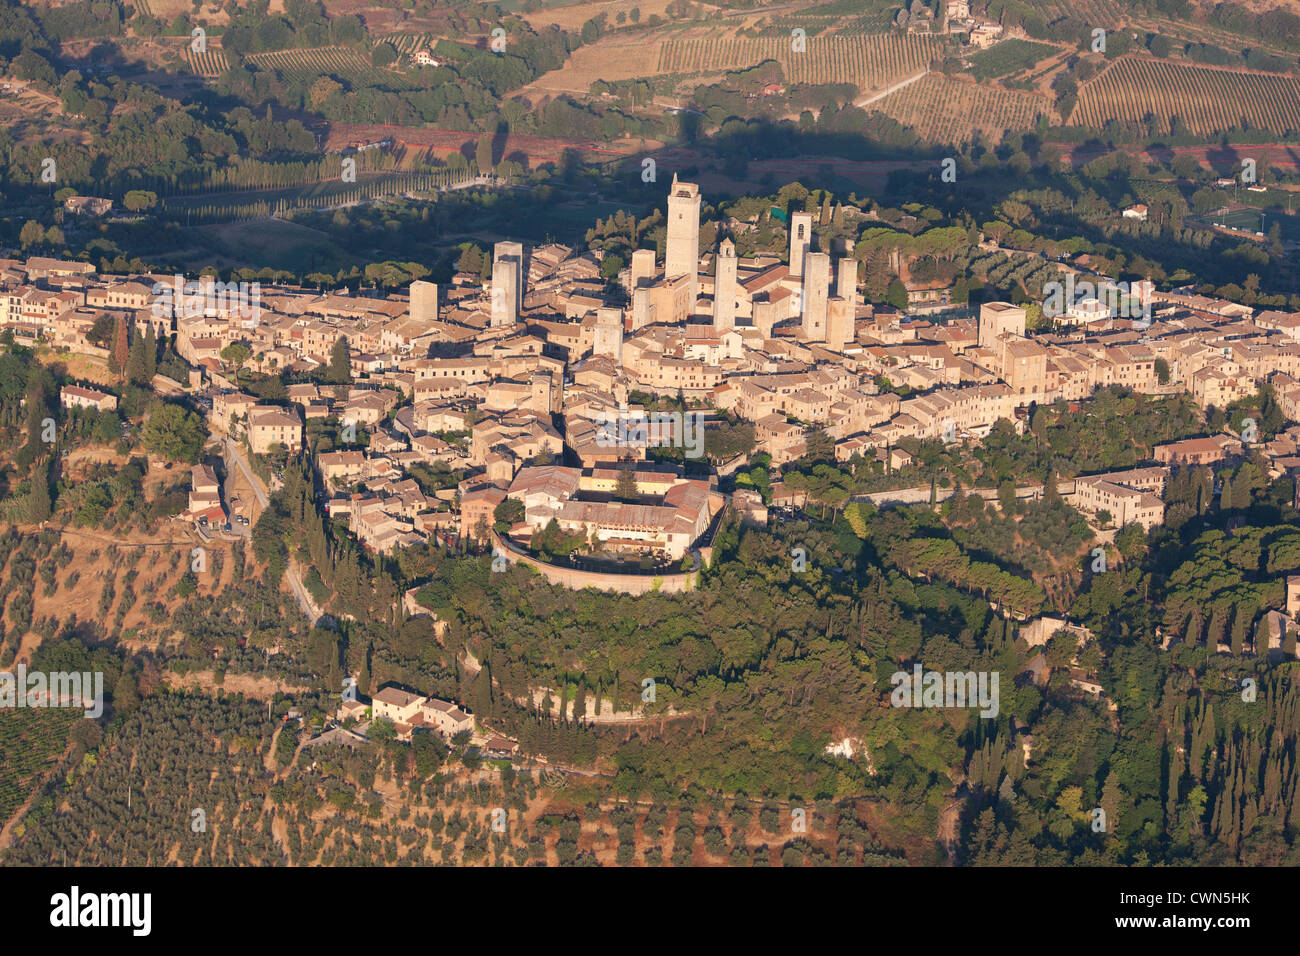 AERIAL VIEW. Medieval hilltop town with its many towers built by rich families centuries ago. San Gimignano, Province of Siena, Tuscany, Italy. Stock Photo